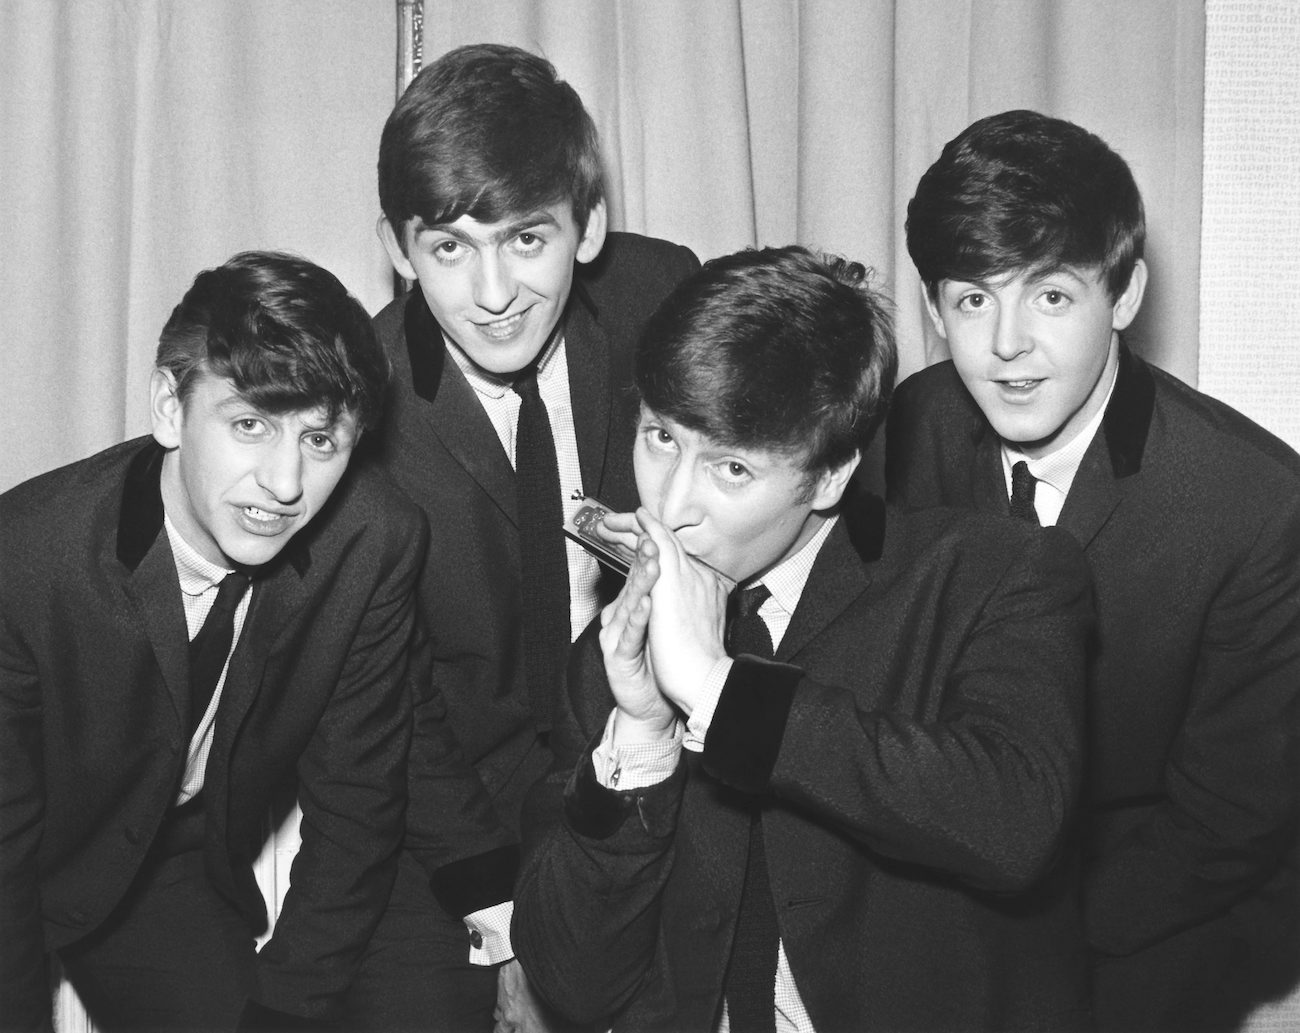 John Lennon with The Beatles in 1962.